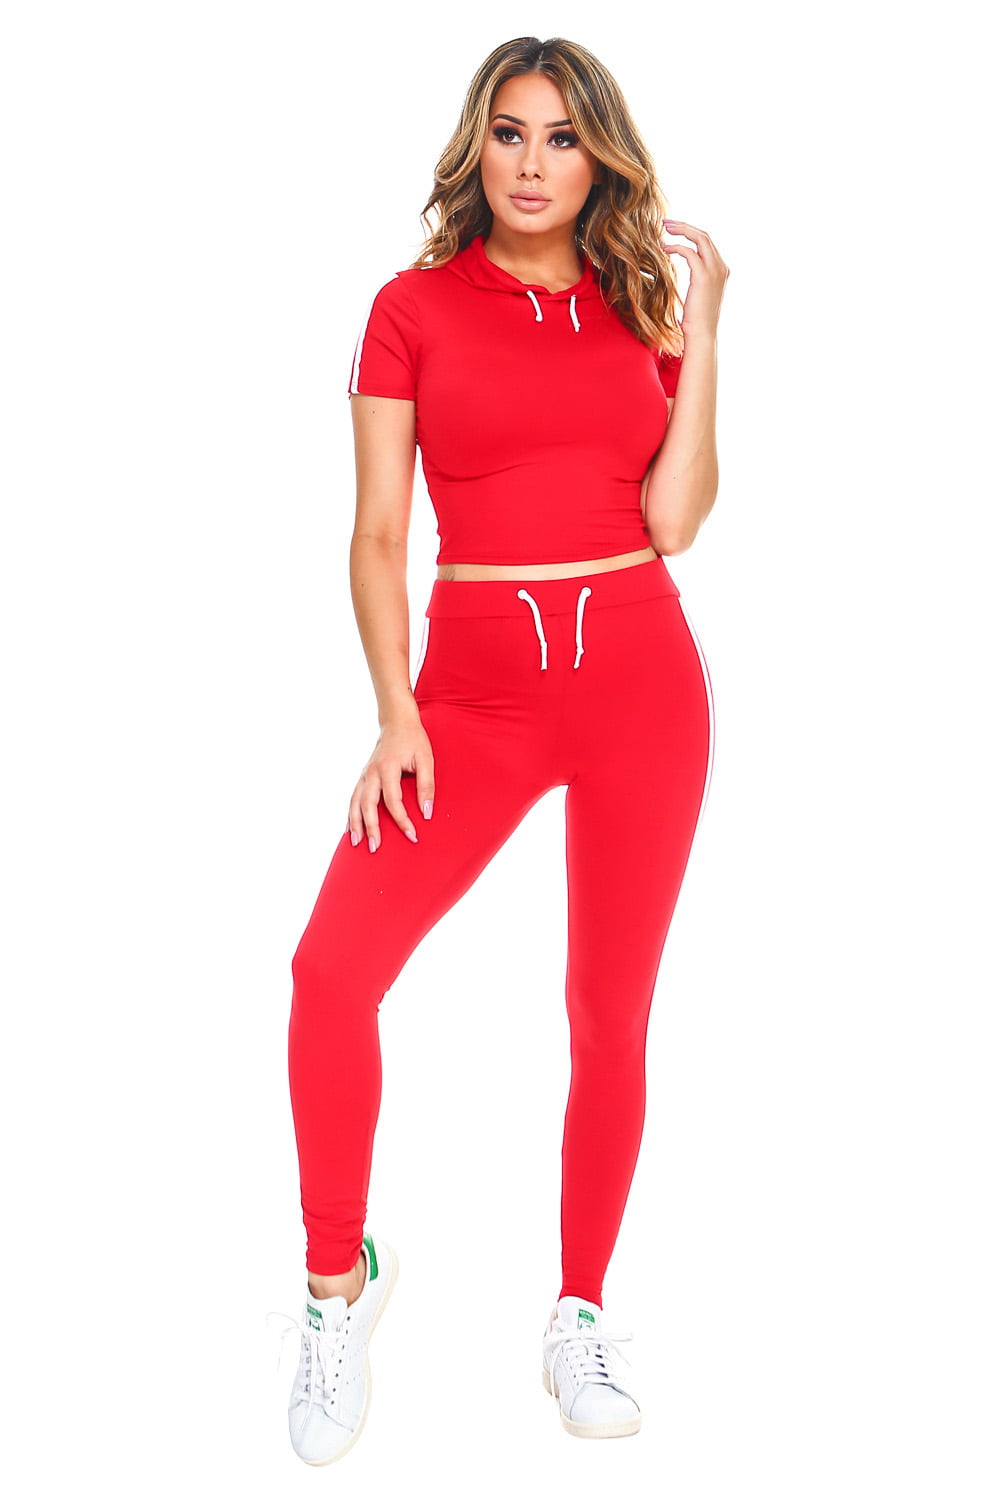 Red jeans outfit. Red jeans and black shirt and matching shoes. | Red jeans  outfit, Outfits, Red jeans